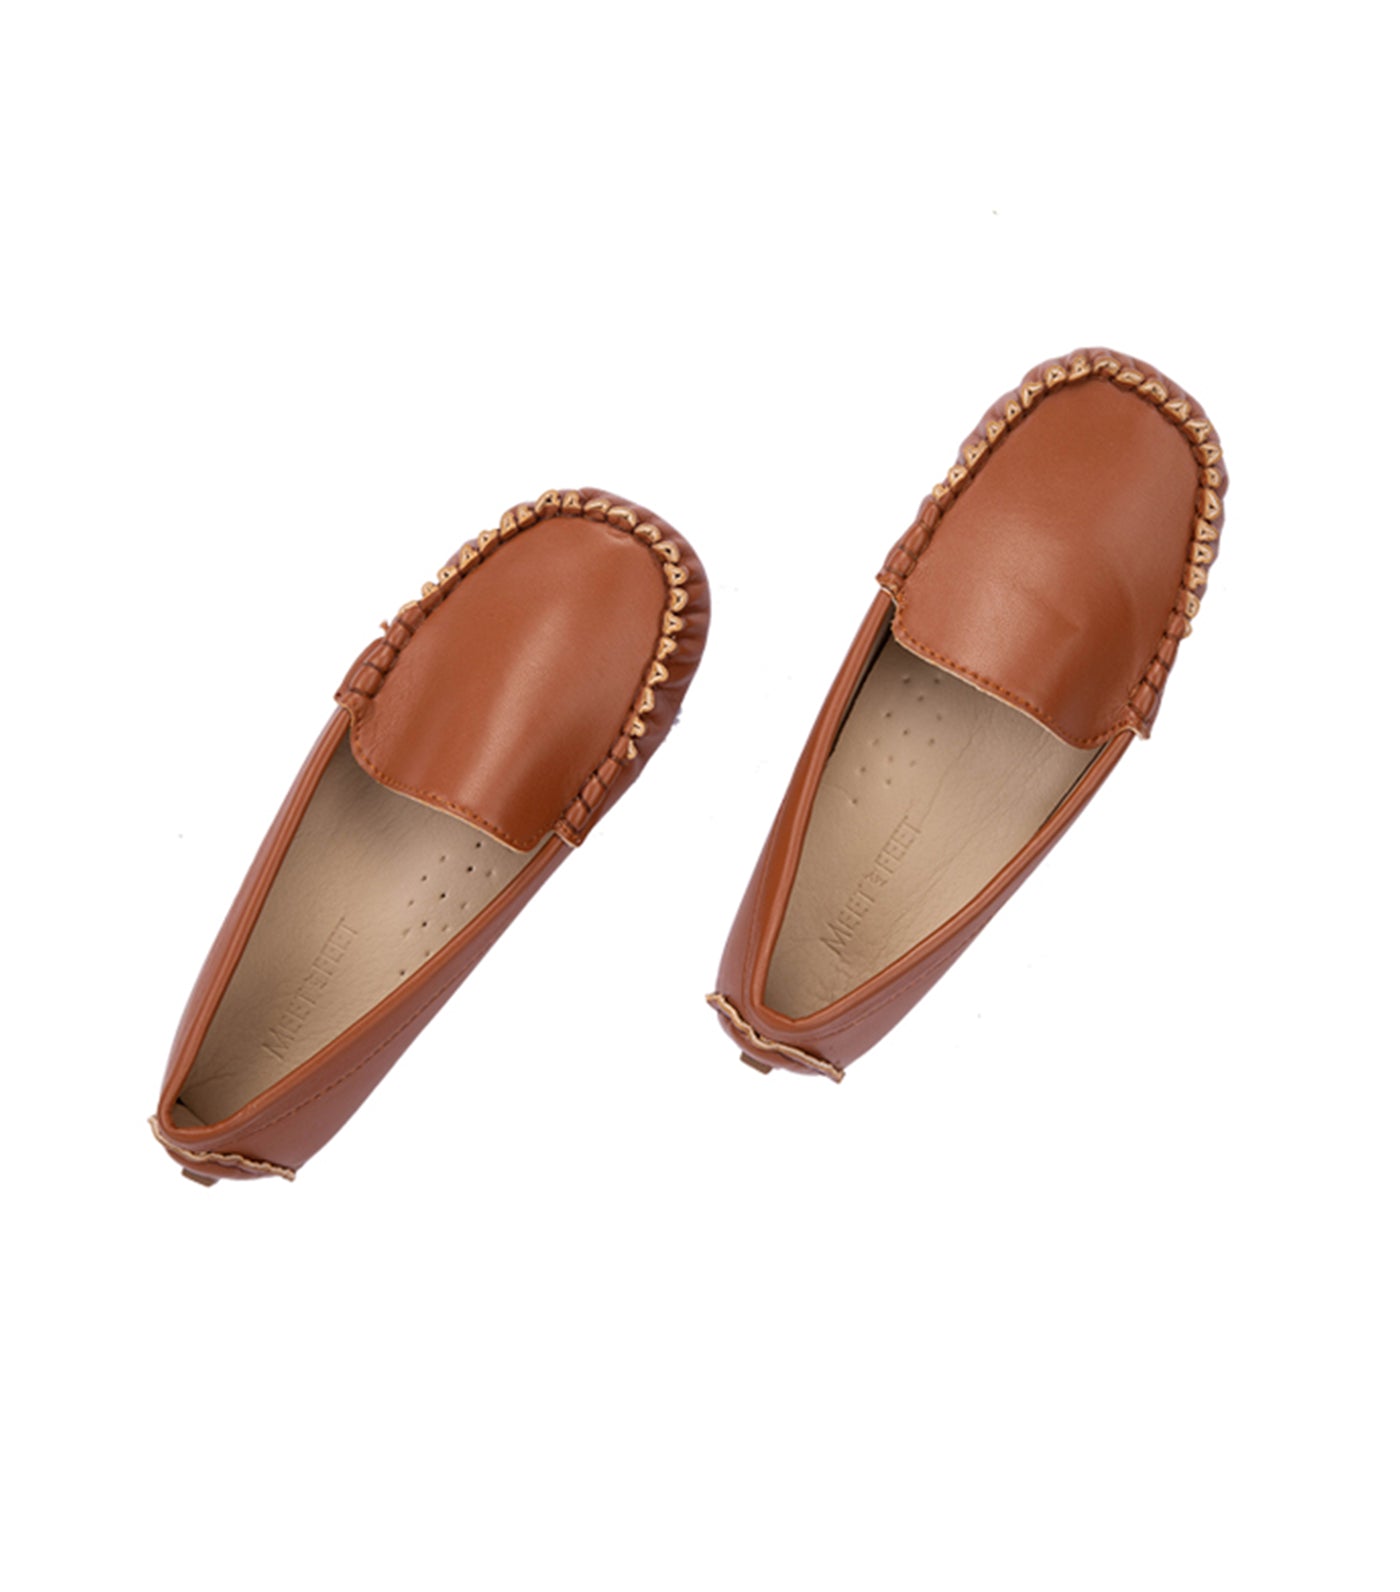 Seth Kids Loafers for Boys - Tan